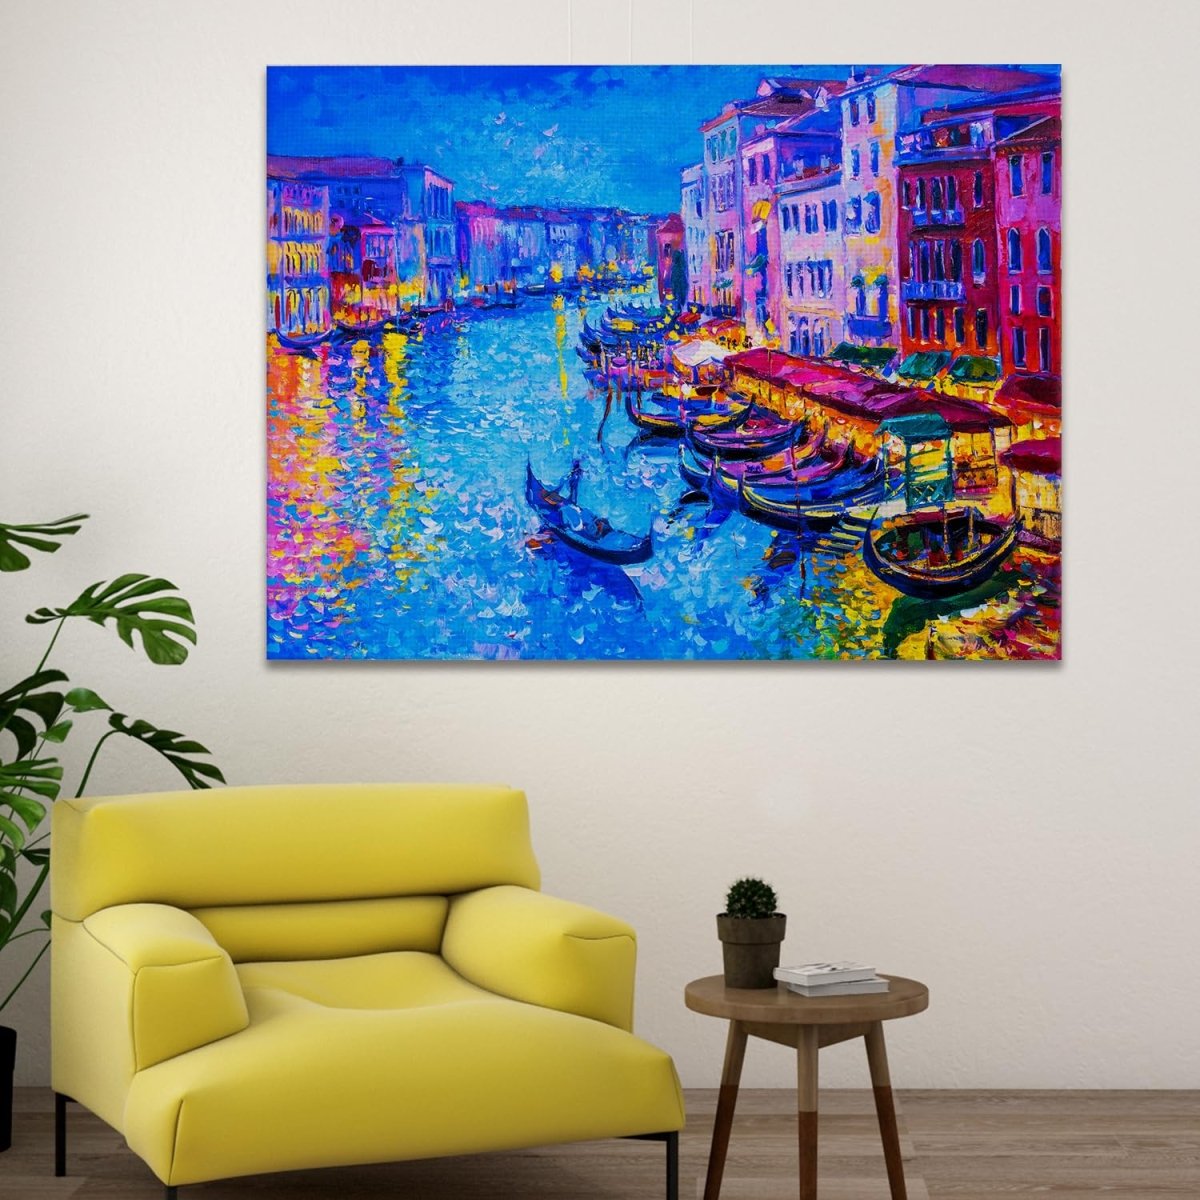 Venice at Sunset Canvas Wall Art (48 x 36 Inches)